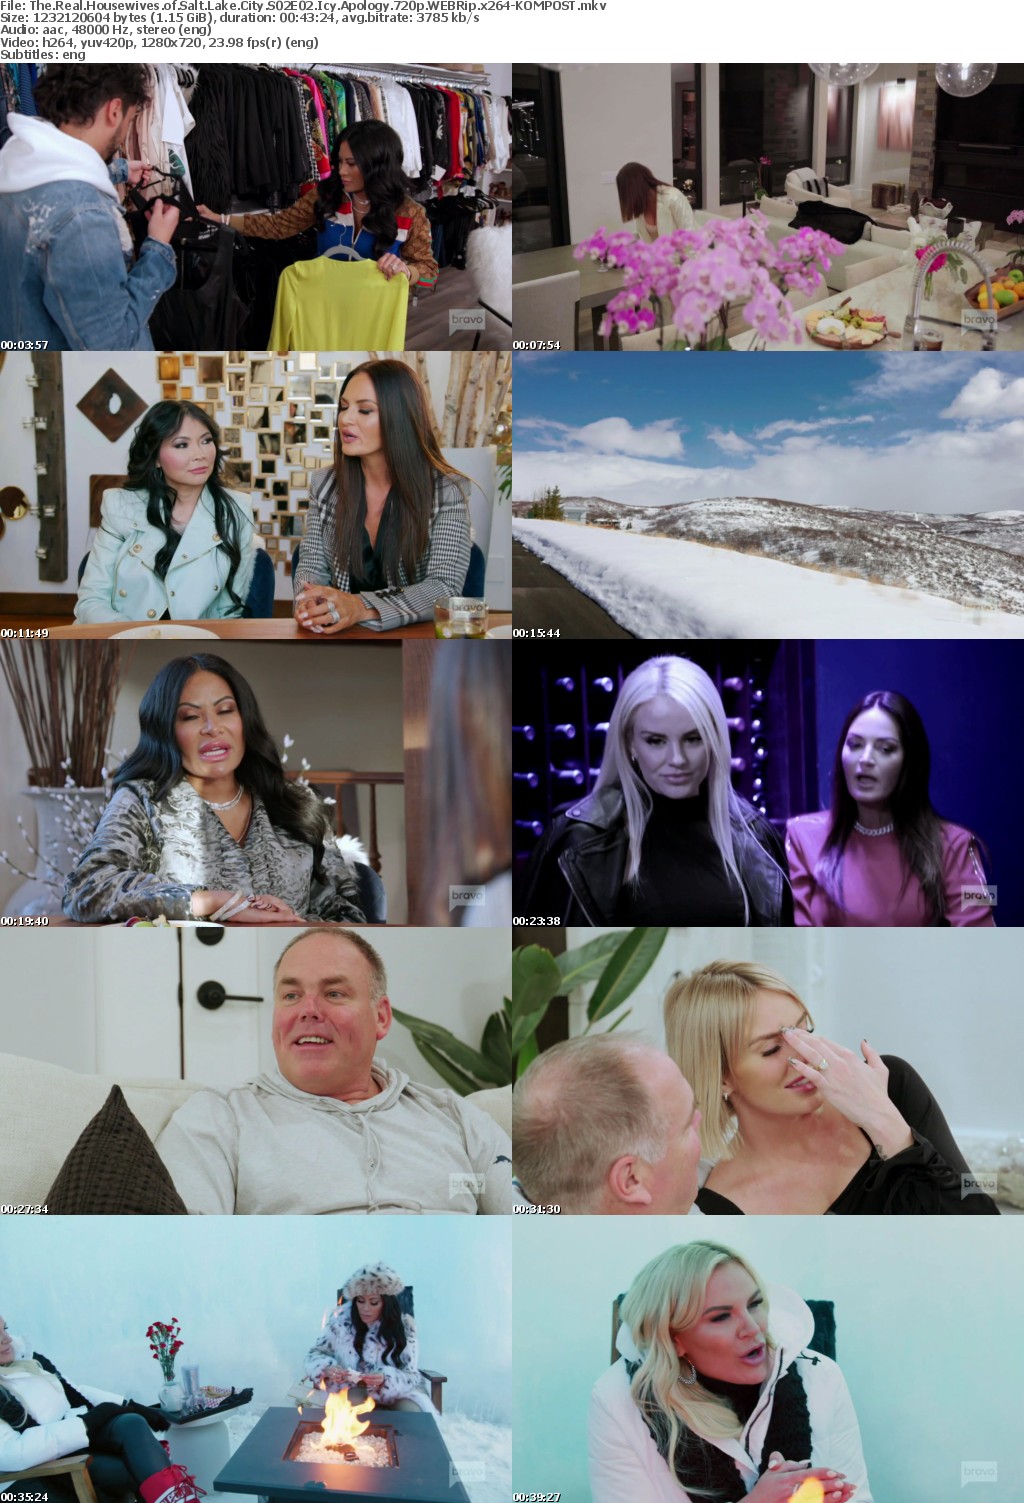 The Real Housewives of Salt Lake City S02E02 Icy Apology 720p WEBRip x264-KOMPOST